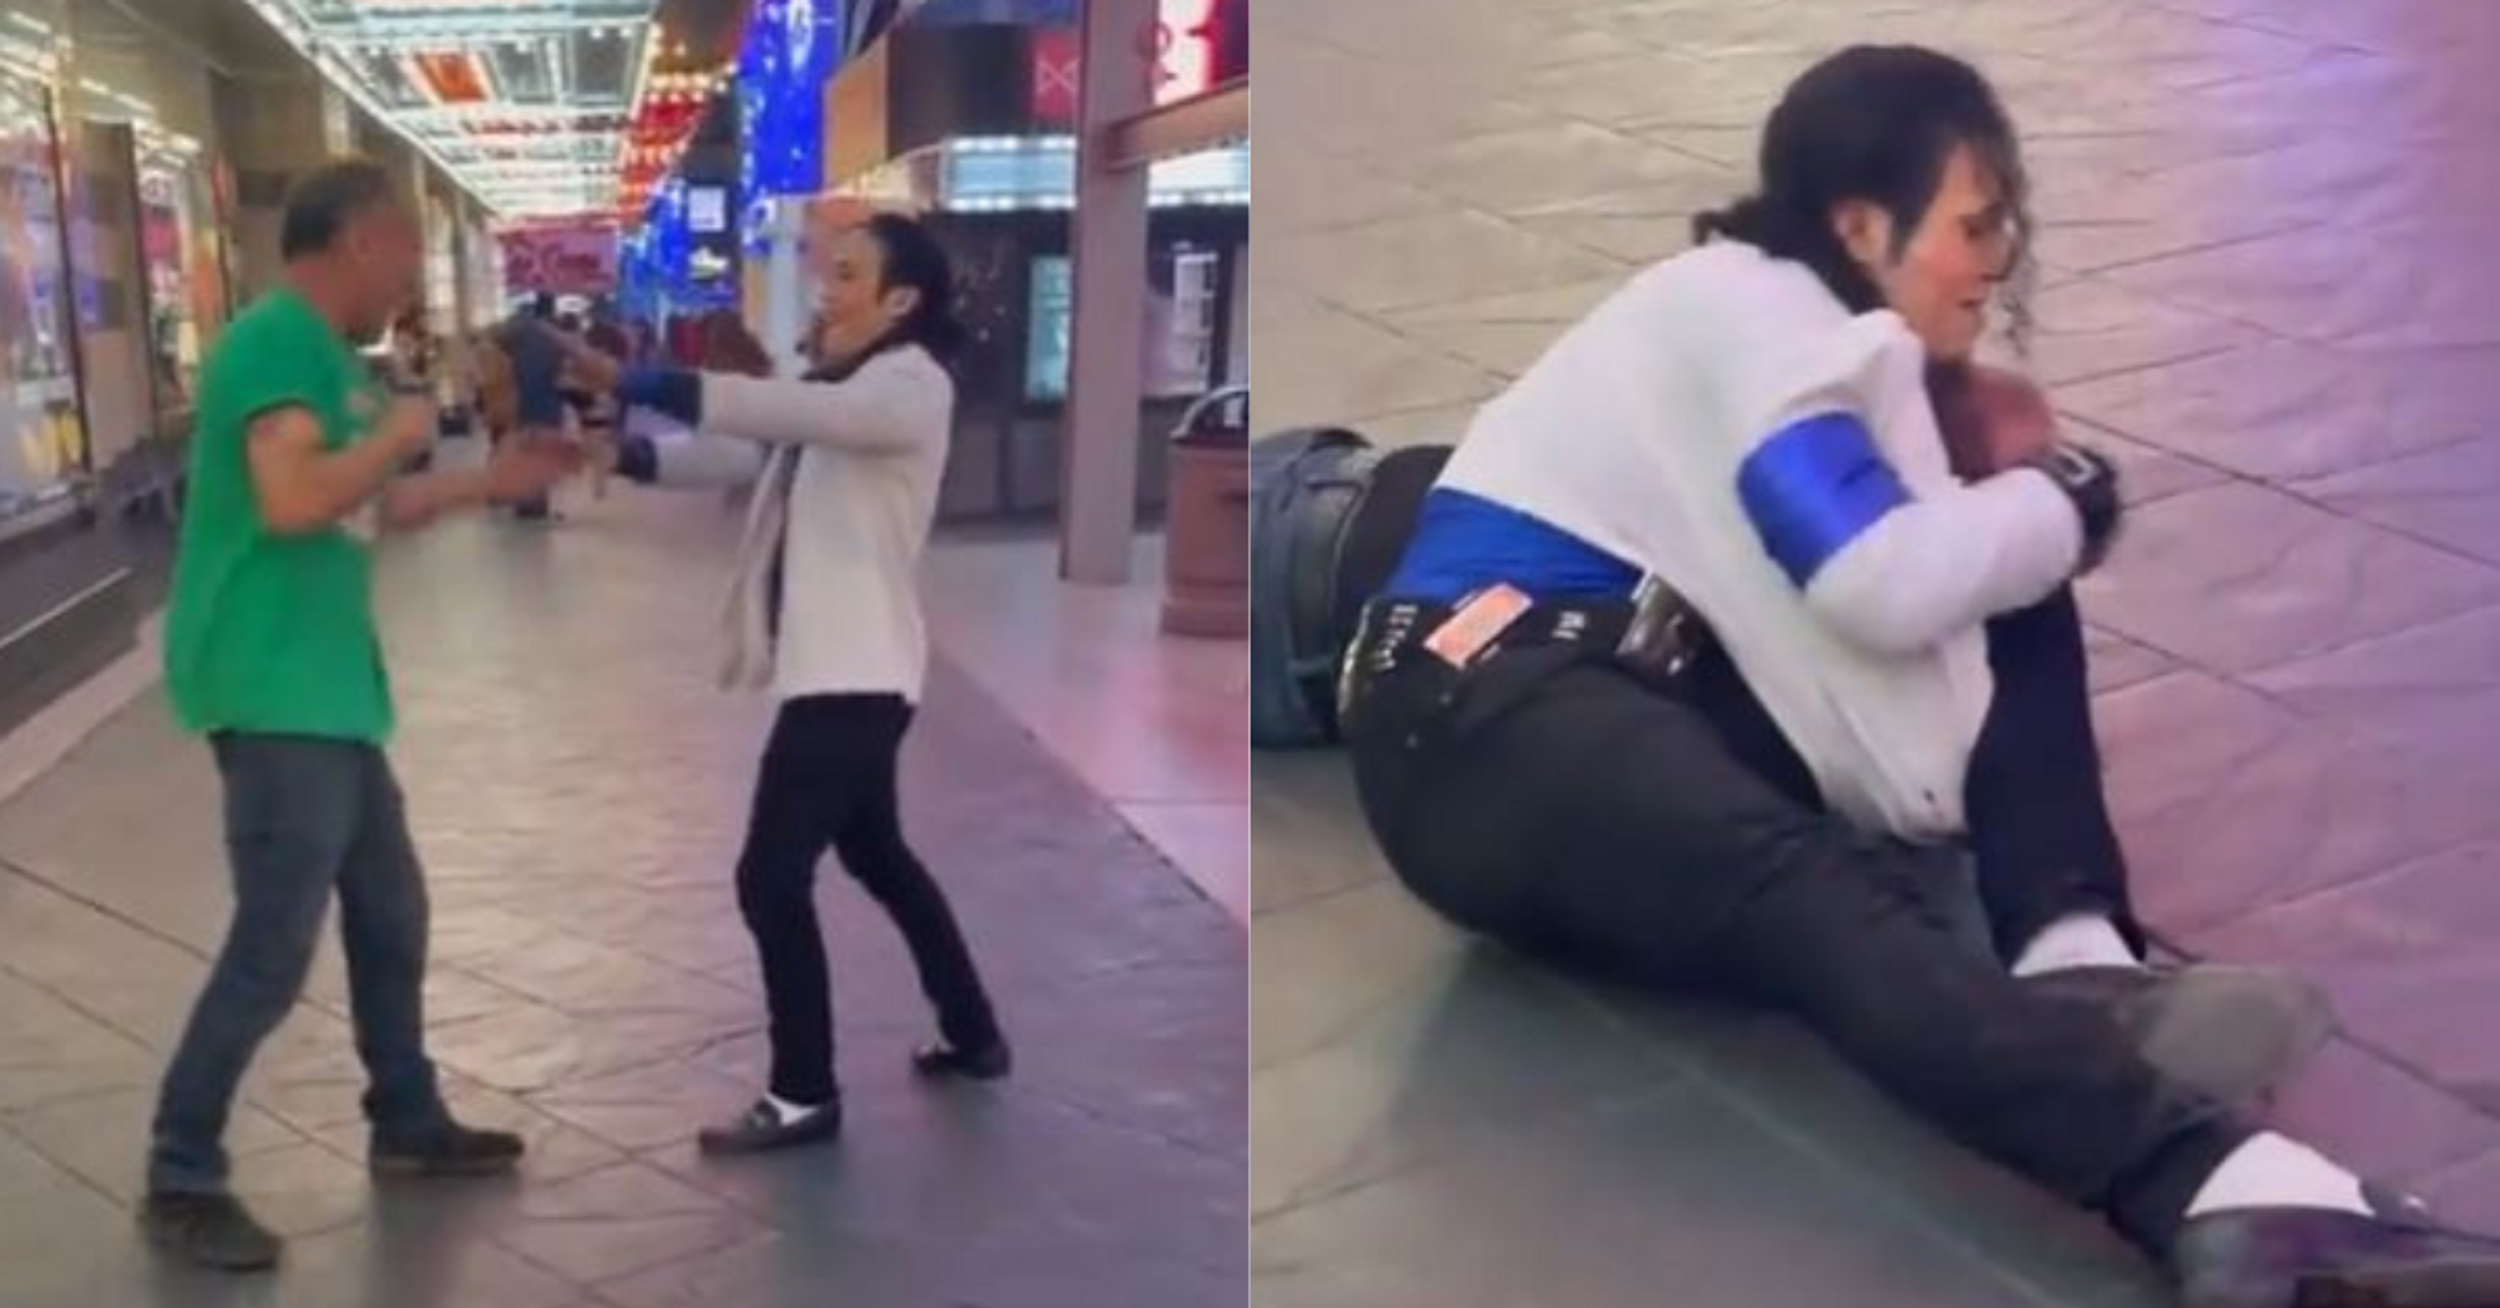 Michael Jackson Impersonator Goes Viral After Using Chokehold To Subdue Man During Street Brawl